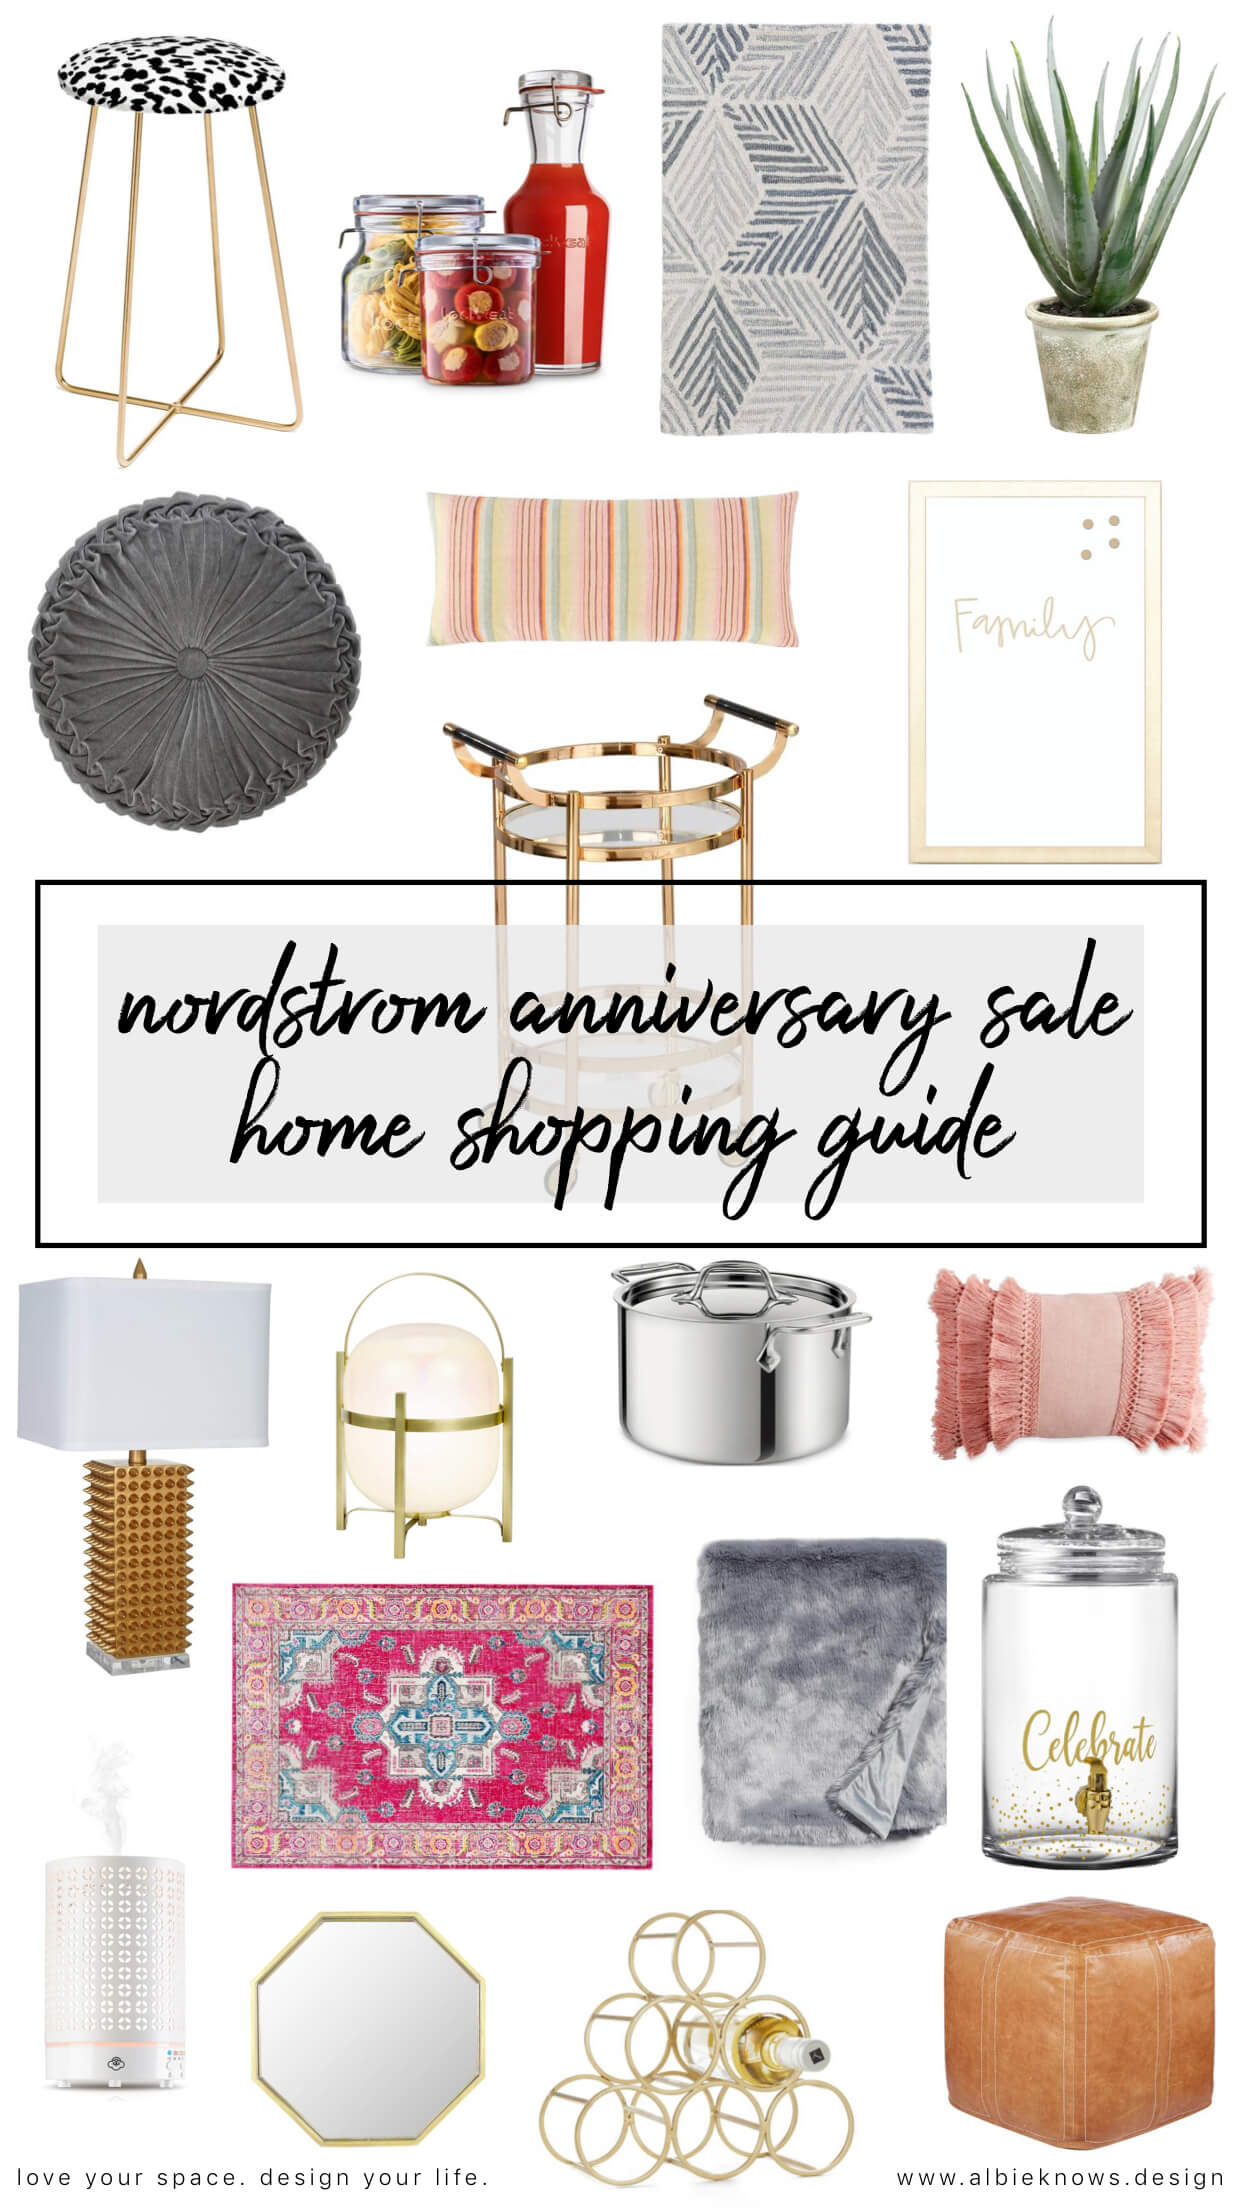 Albie Knows Nordstrom Anniversary Sale Home Finds 3.jpeg